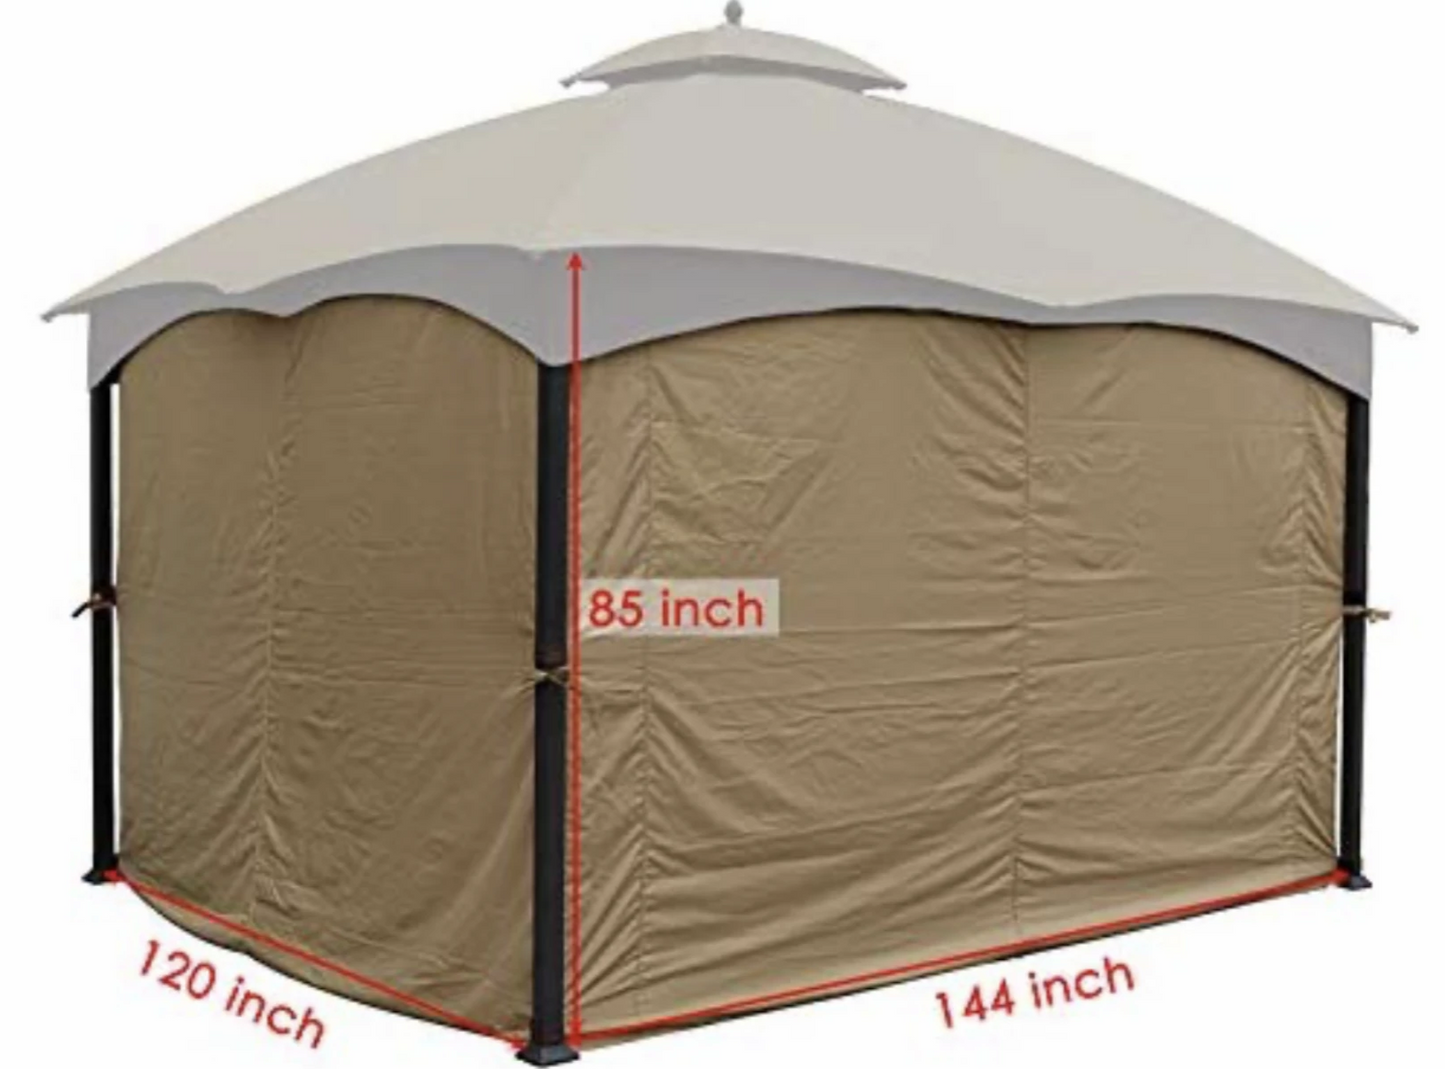 Lowes Allen and Roth 10 X 12 510327 GF12S004B & GF12S004B1 Gazebo Refresh Bundle Canopy,Bug Screen,Curtain All in one Package